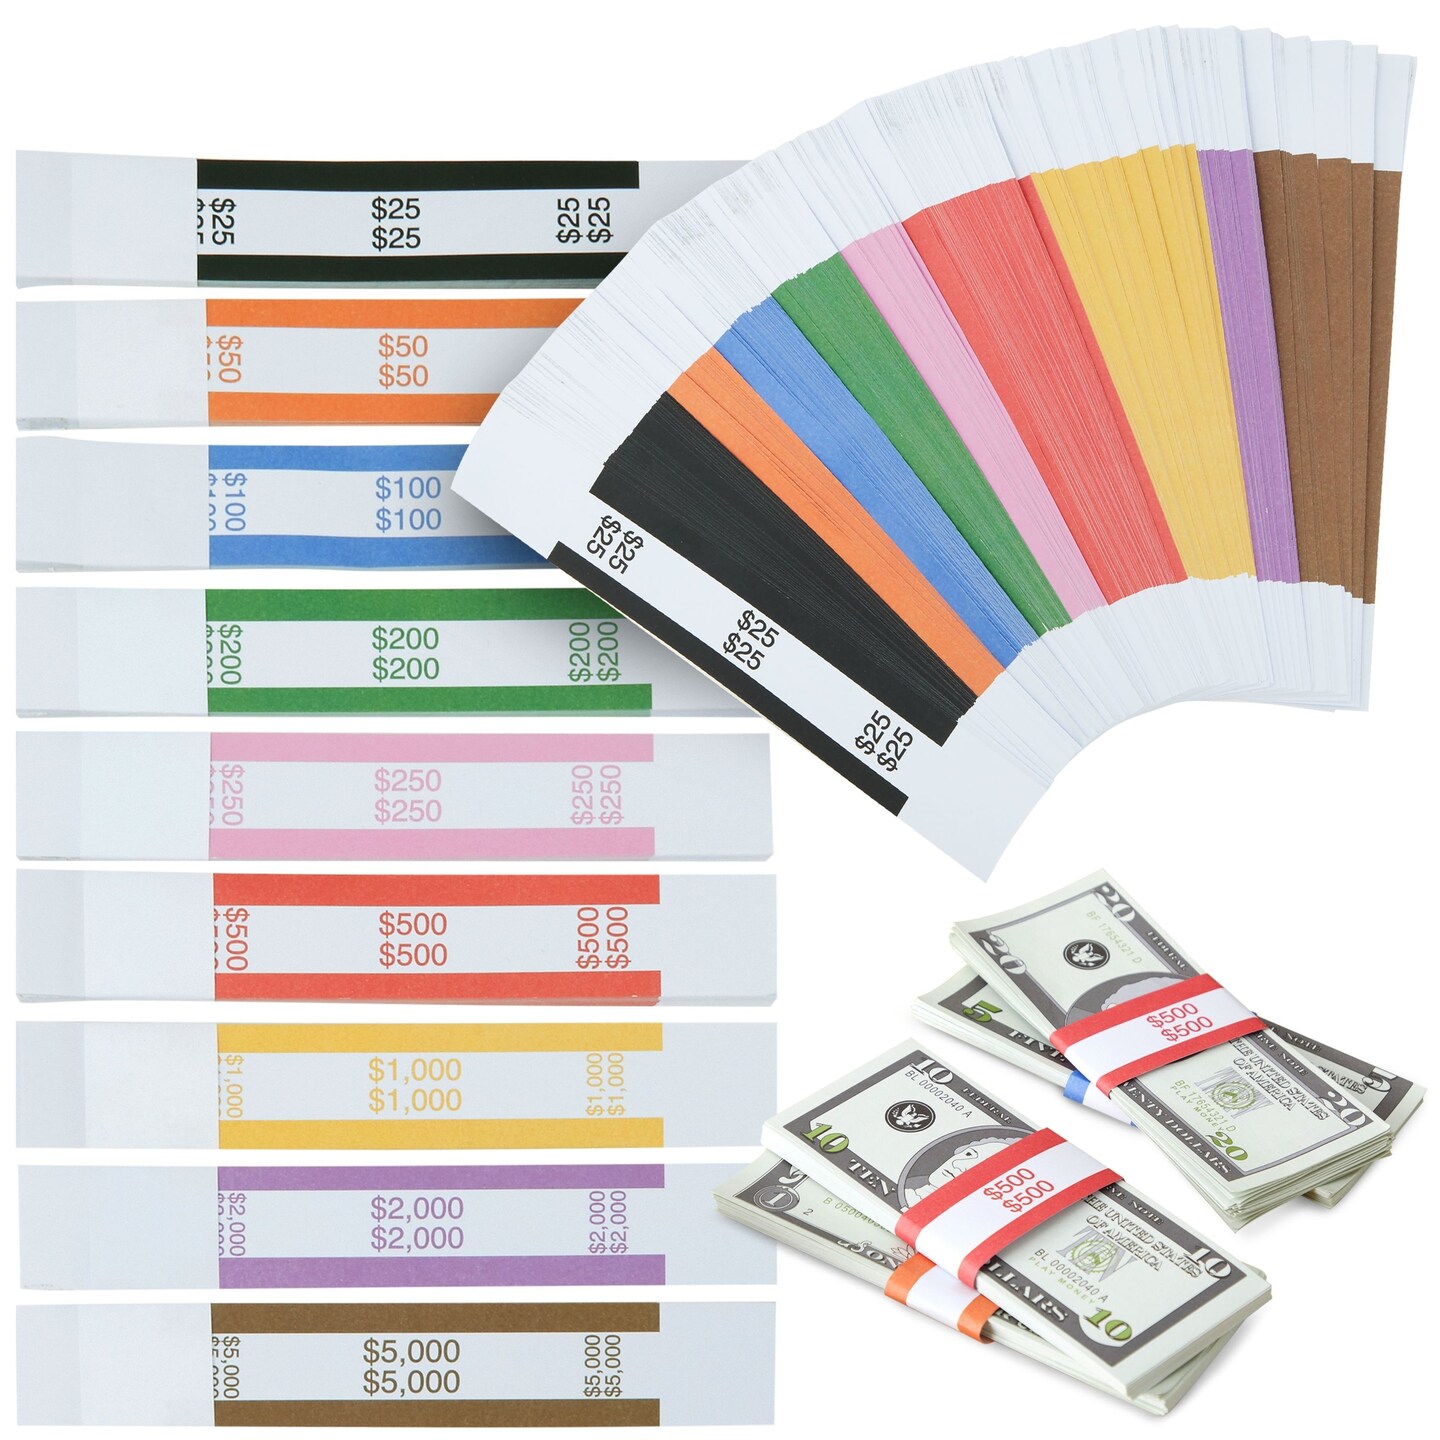 300-Pack of Money Bands for Cash, Assorted Self-Adhesive Currency Straps for Bill Wrappers, Organizing, Sorting Cash, 9 ABA Standard Colors (7.75 x 1.25 Inches)